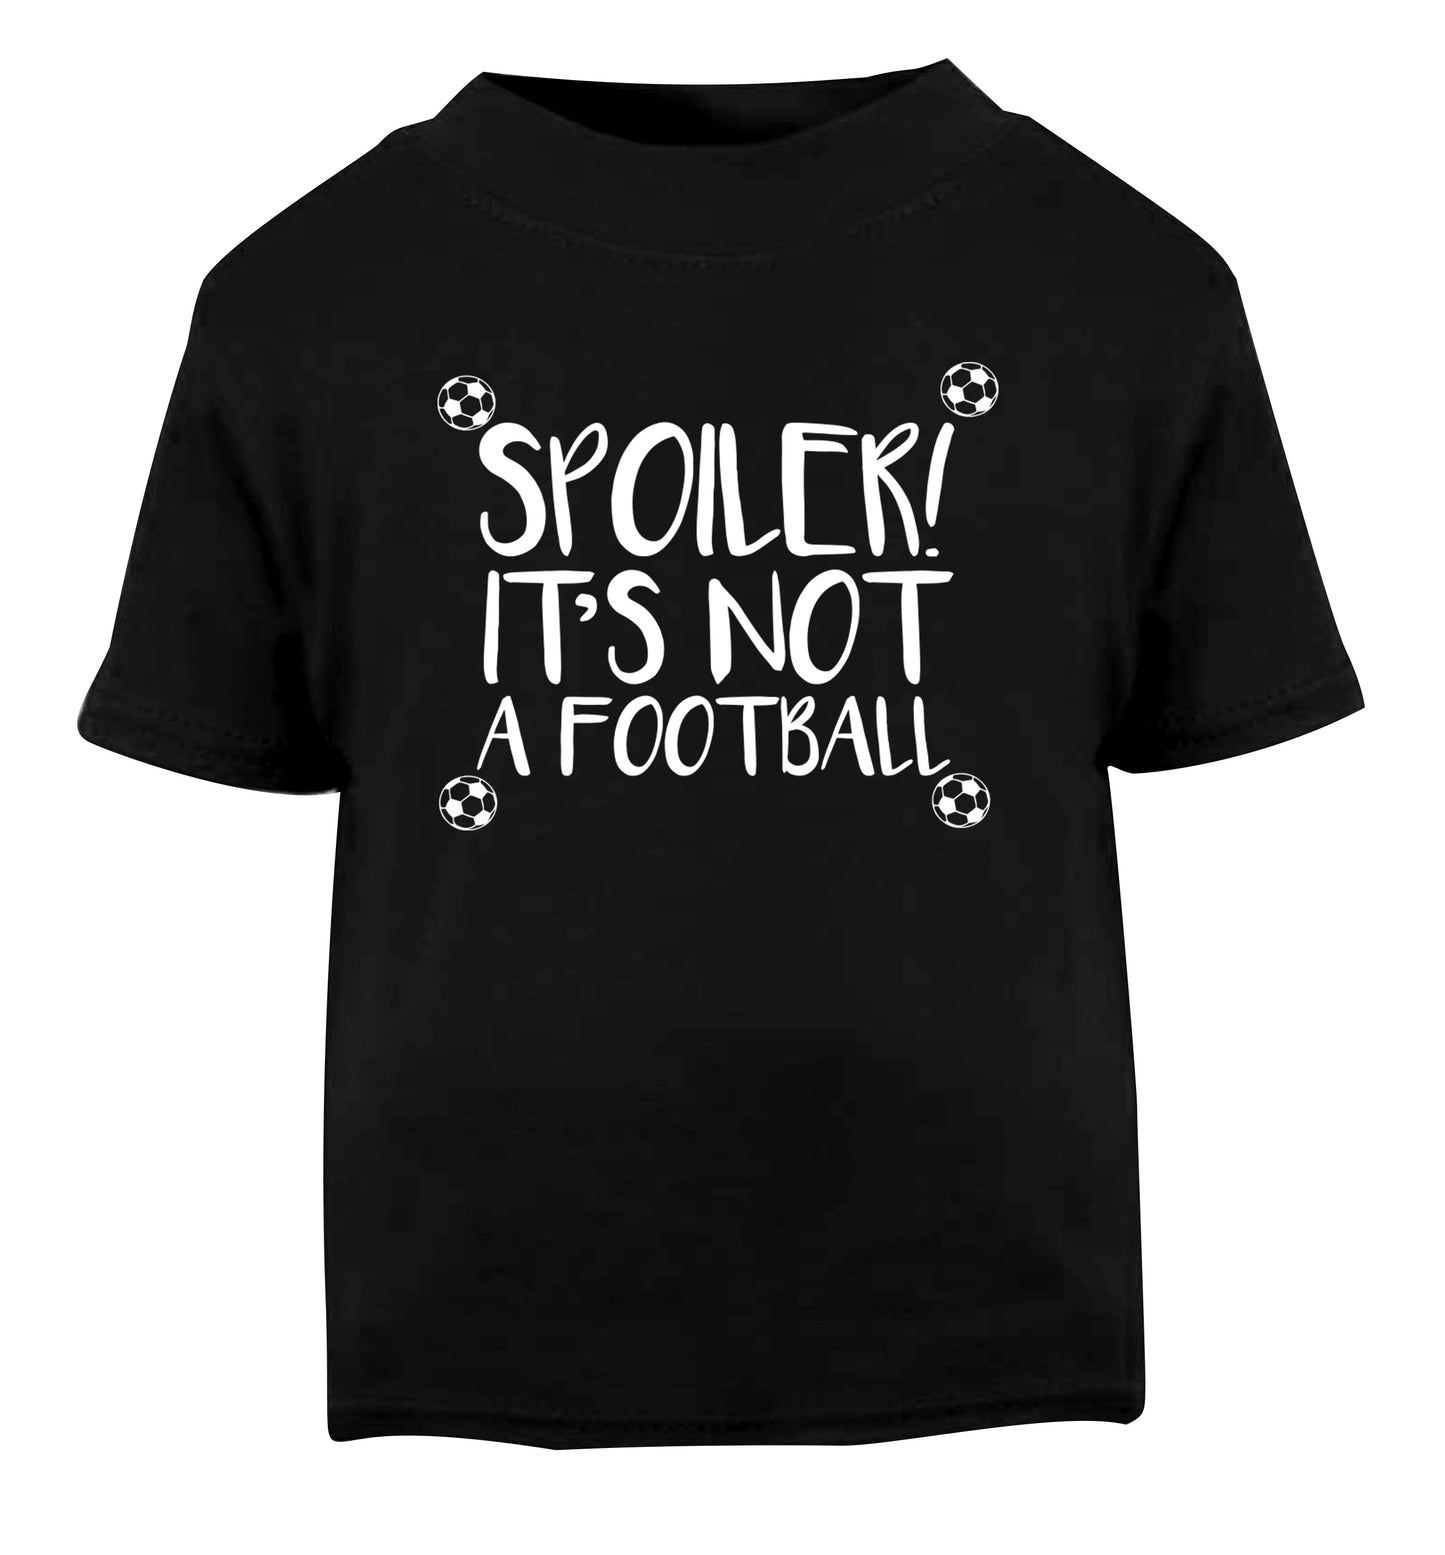 Spoiler it's not a football Black Baby Toddler Tshirt 2 years